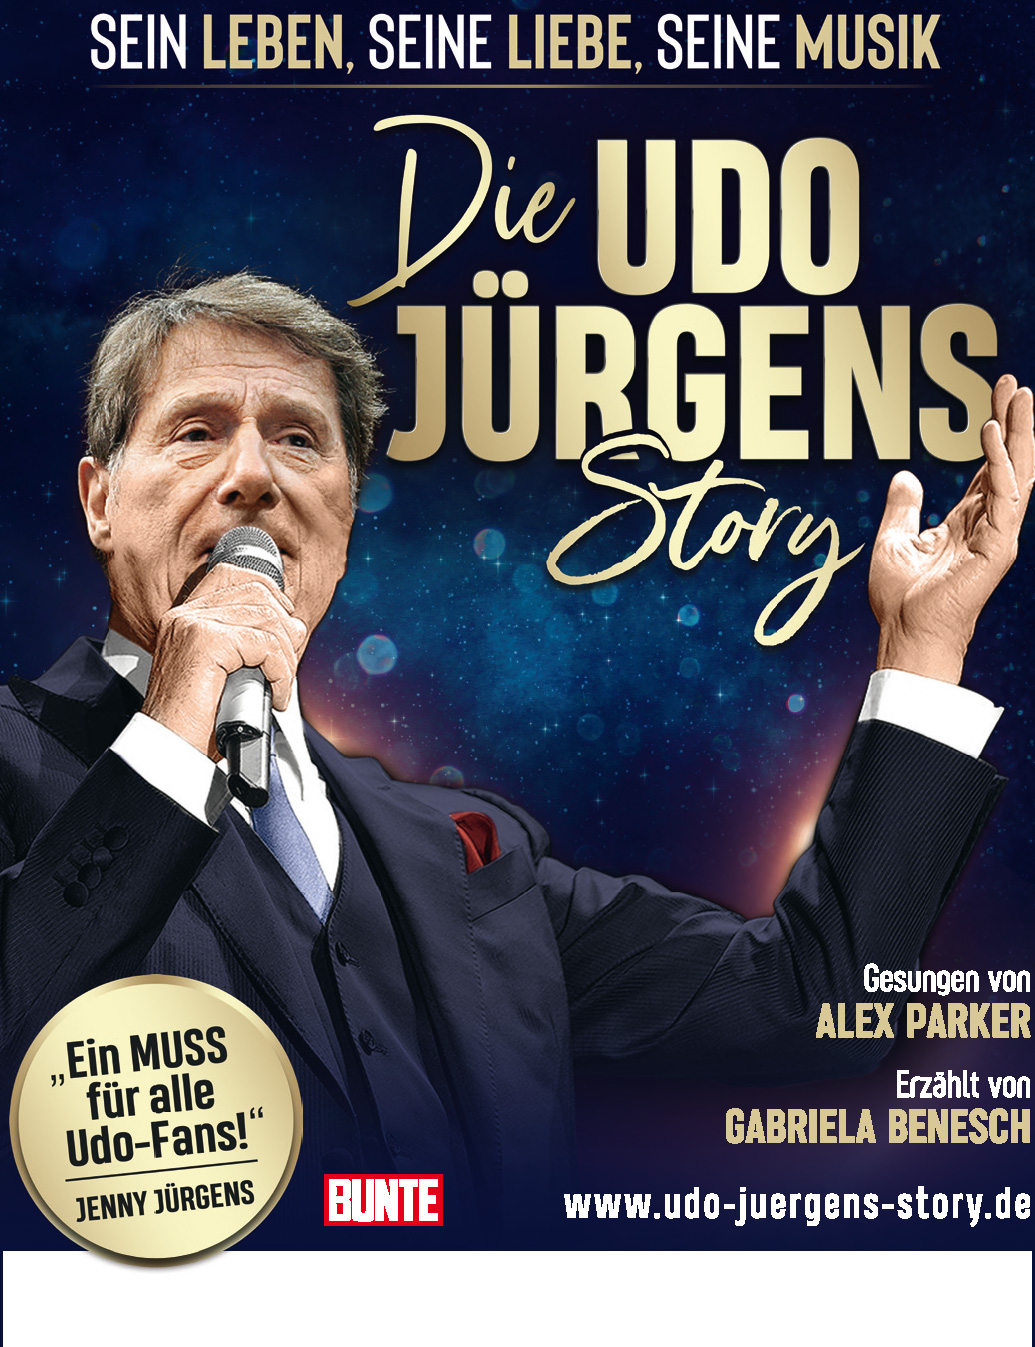 The Voice of Germany – Live in Concert 2019